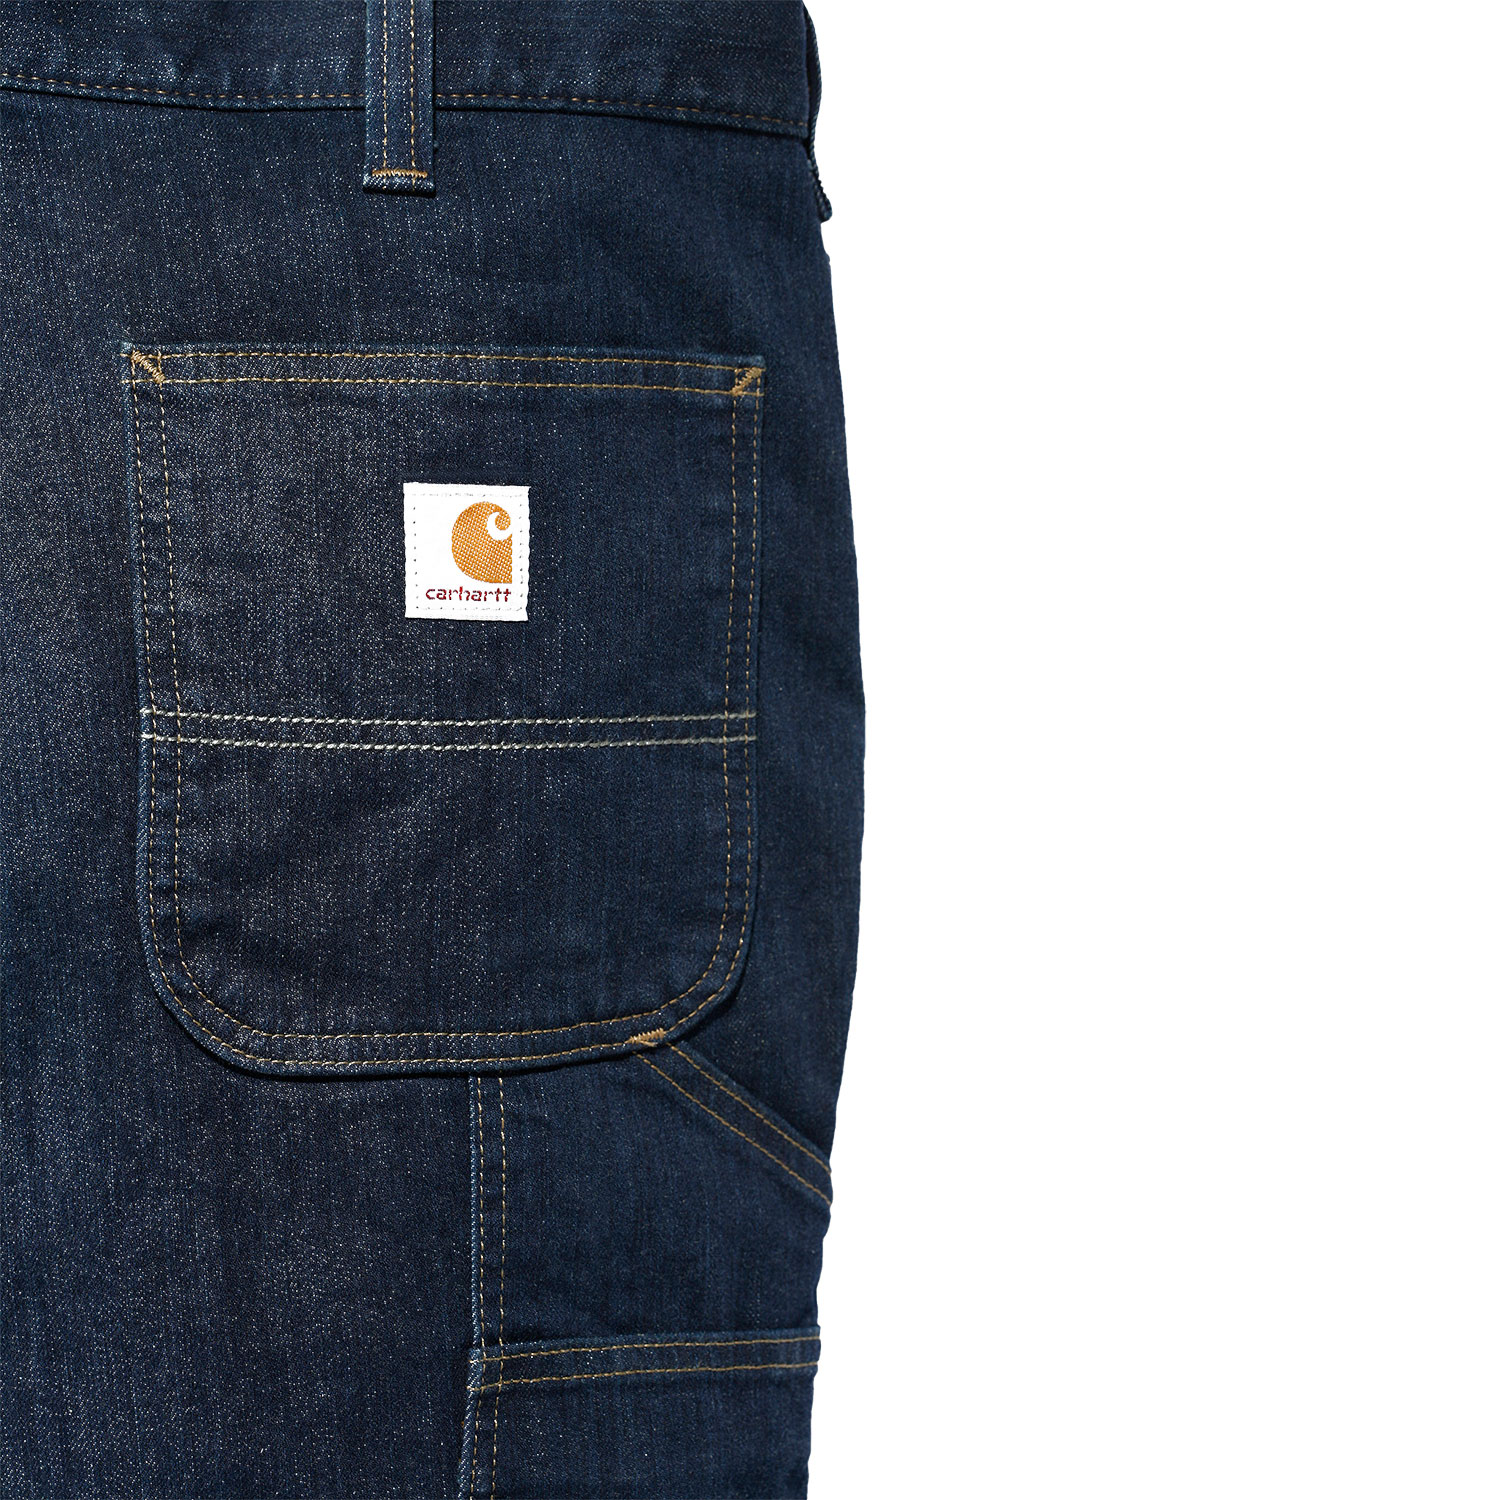 Carhartt Double Front Dungaree Jeans - 3